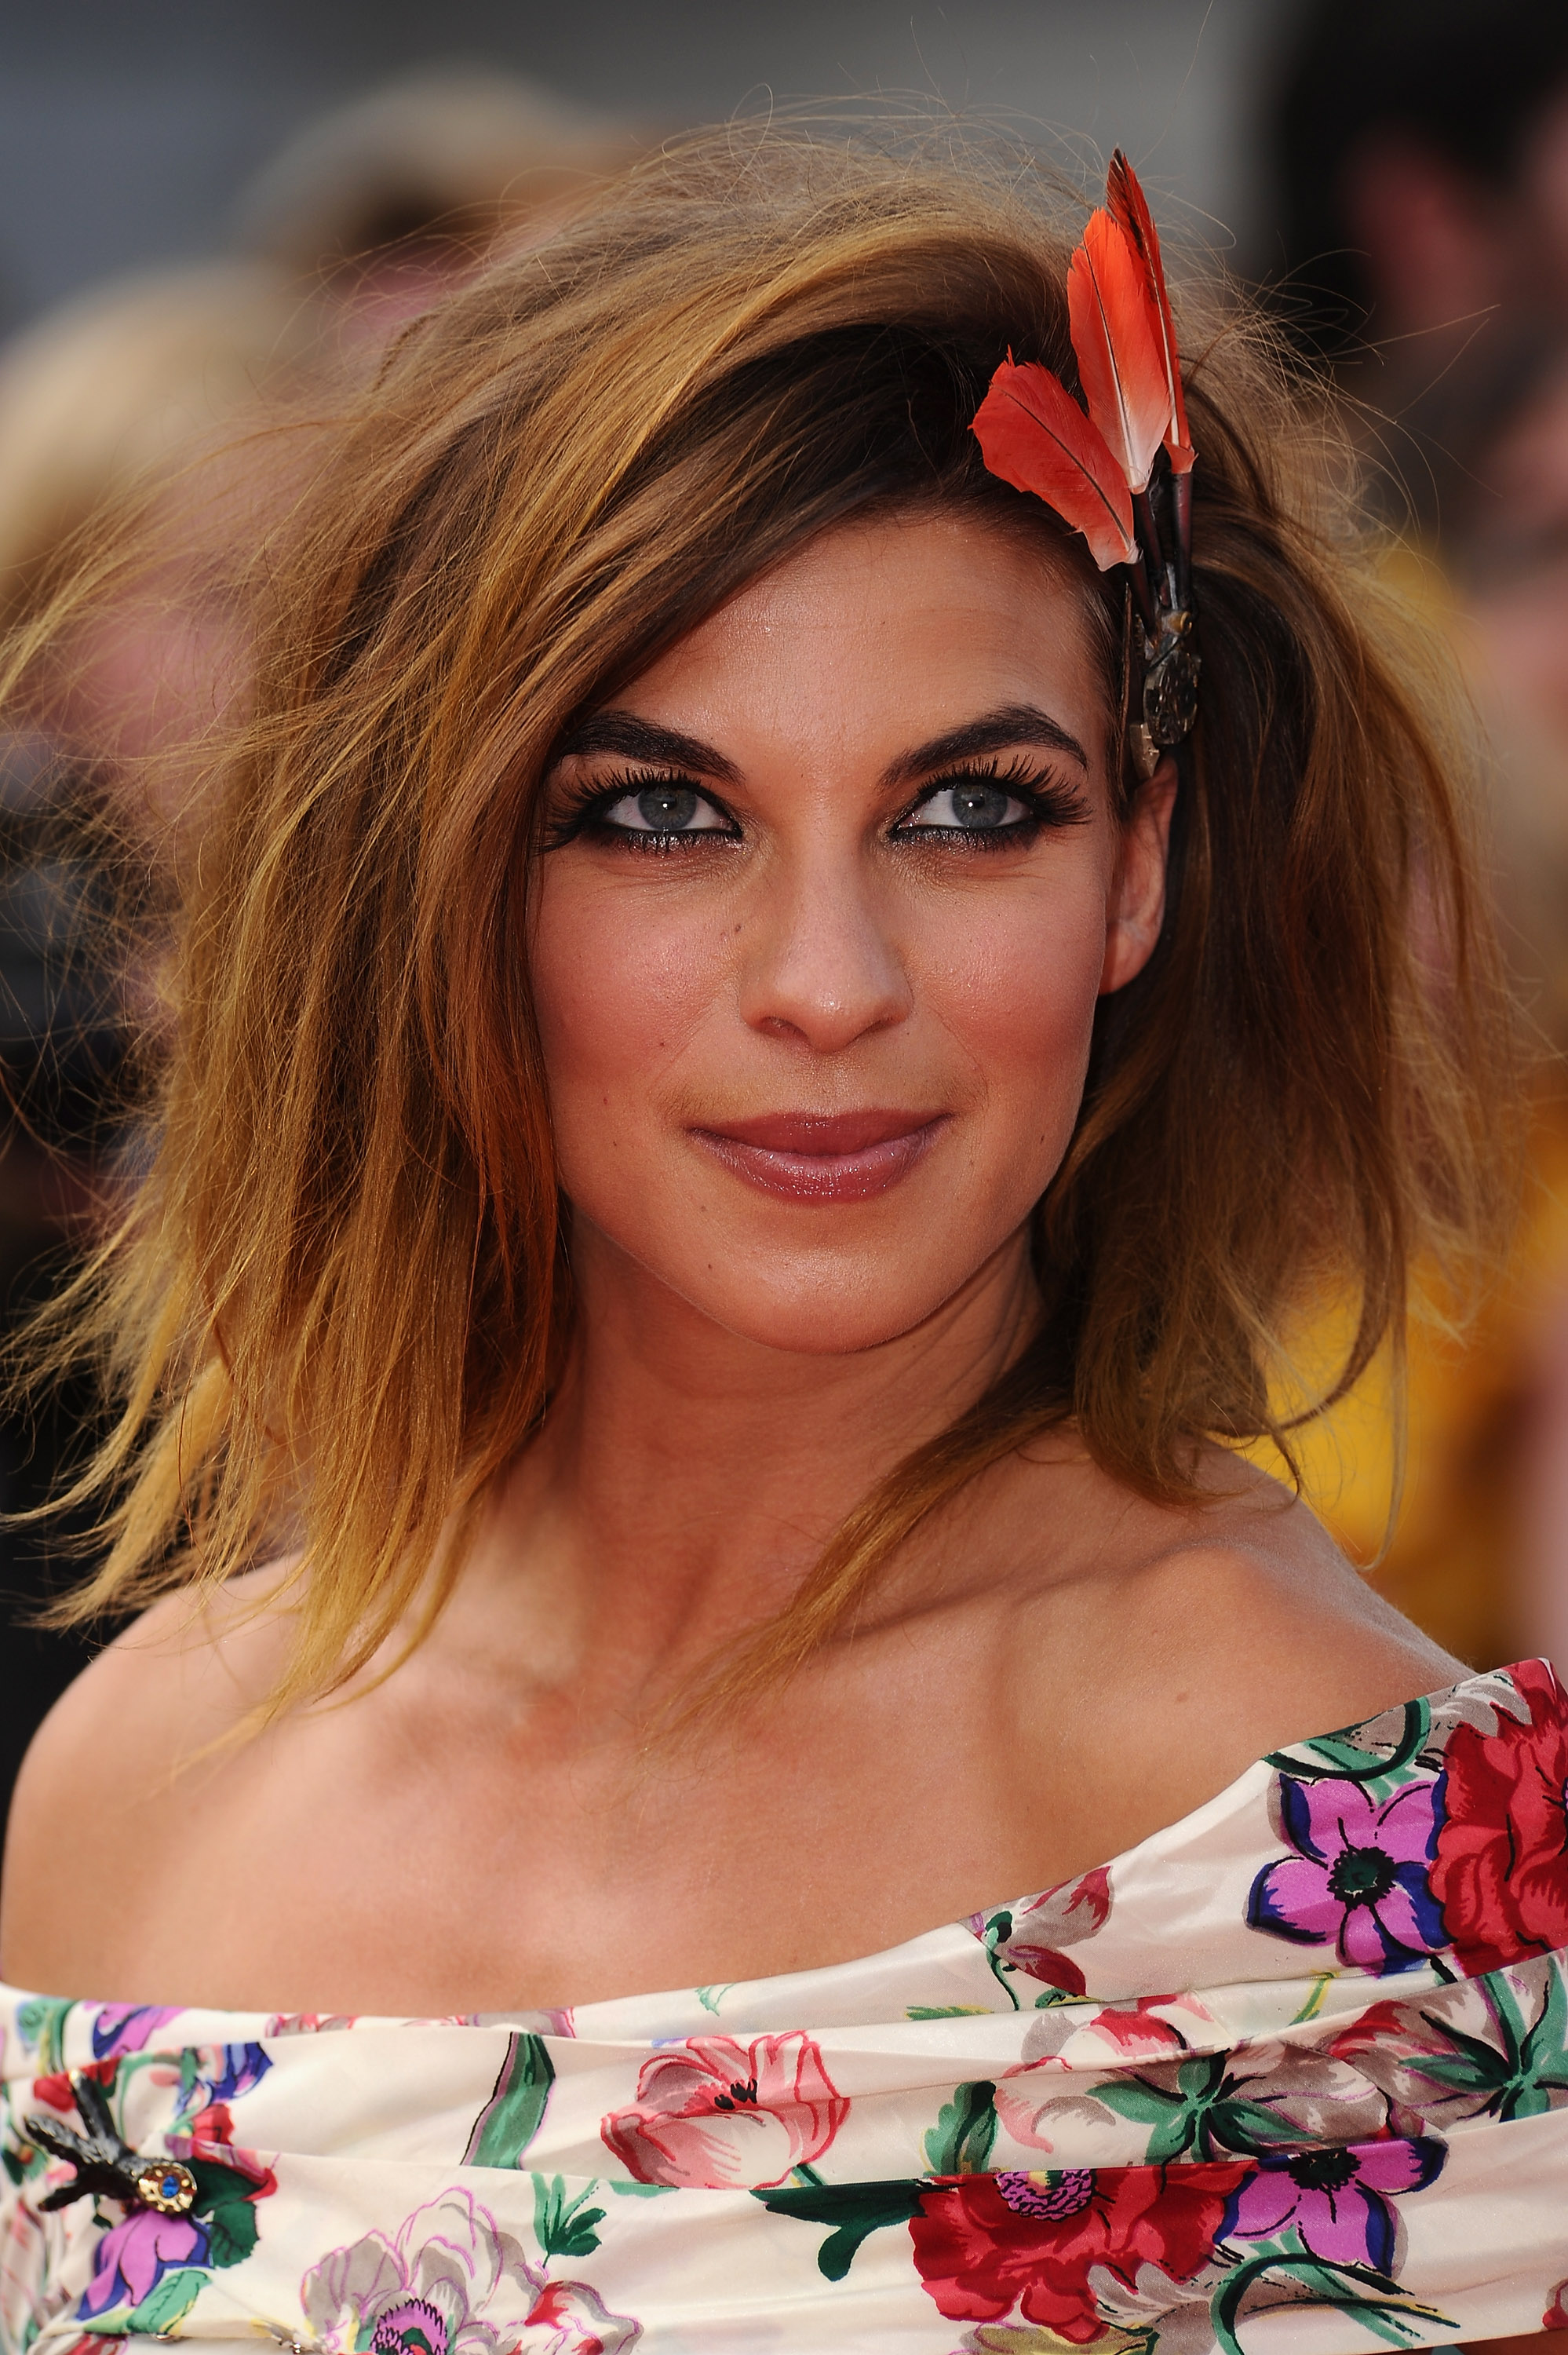 Natalia Tena Wallpapers High Resolution and Quality Download